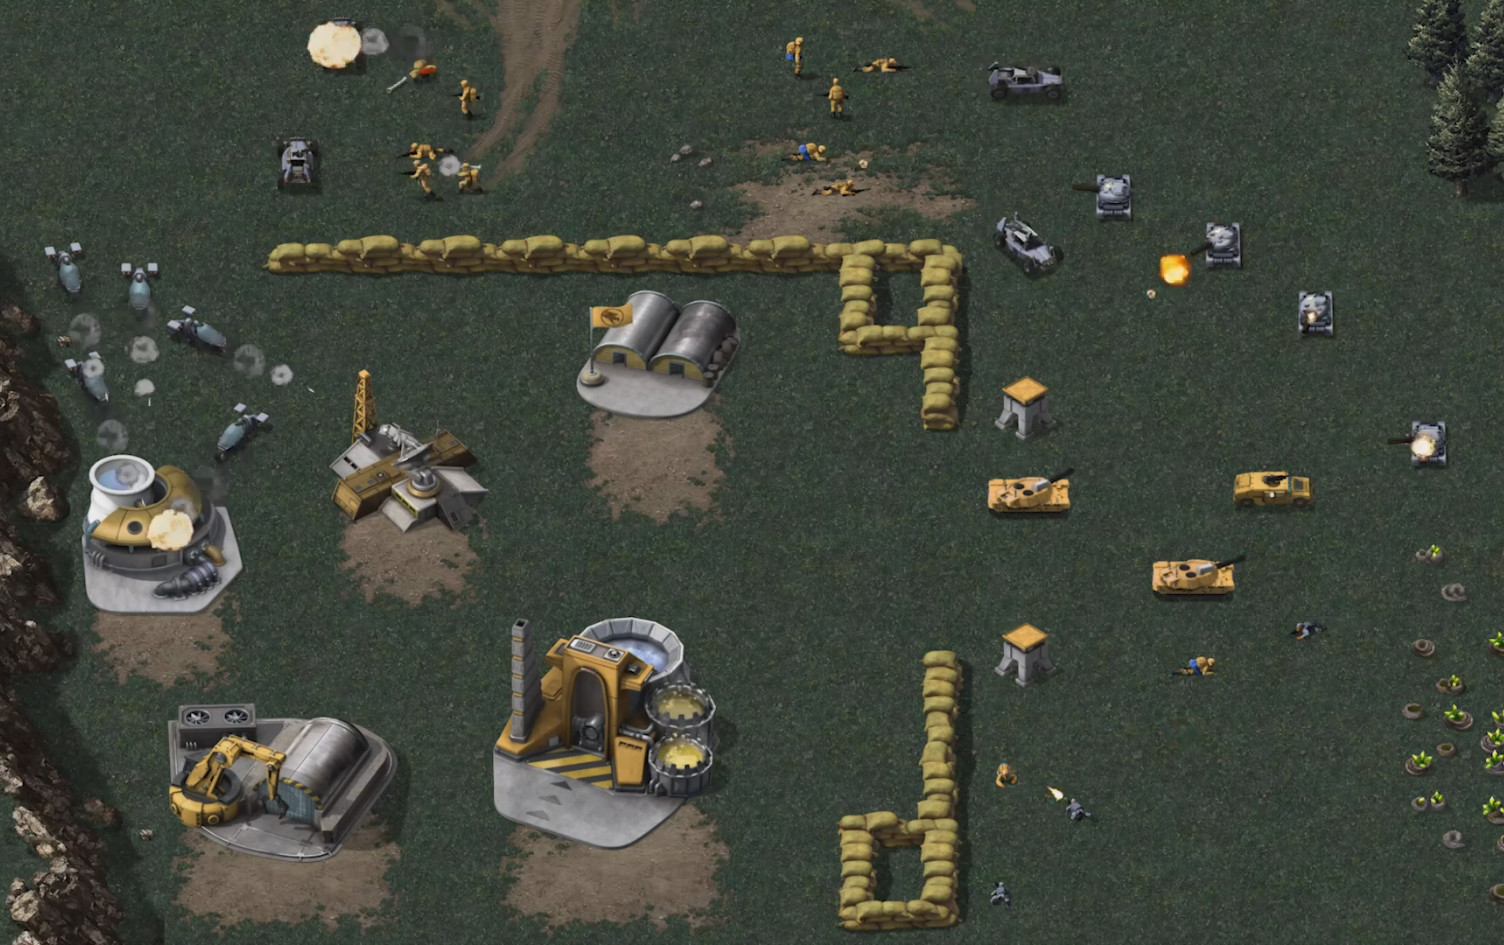 command and conquer game chronology